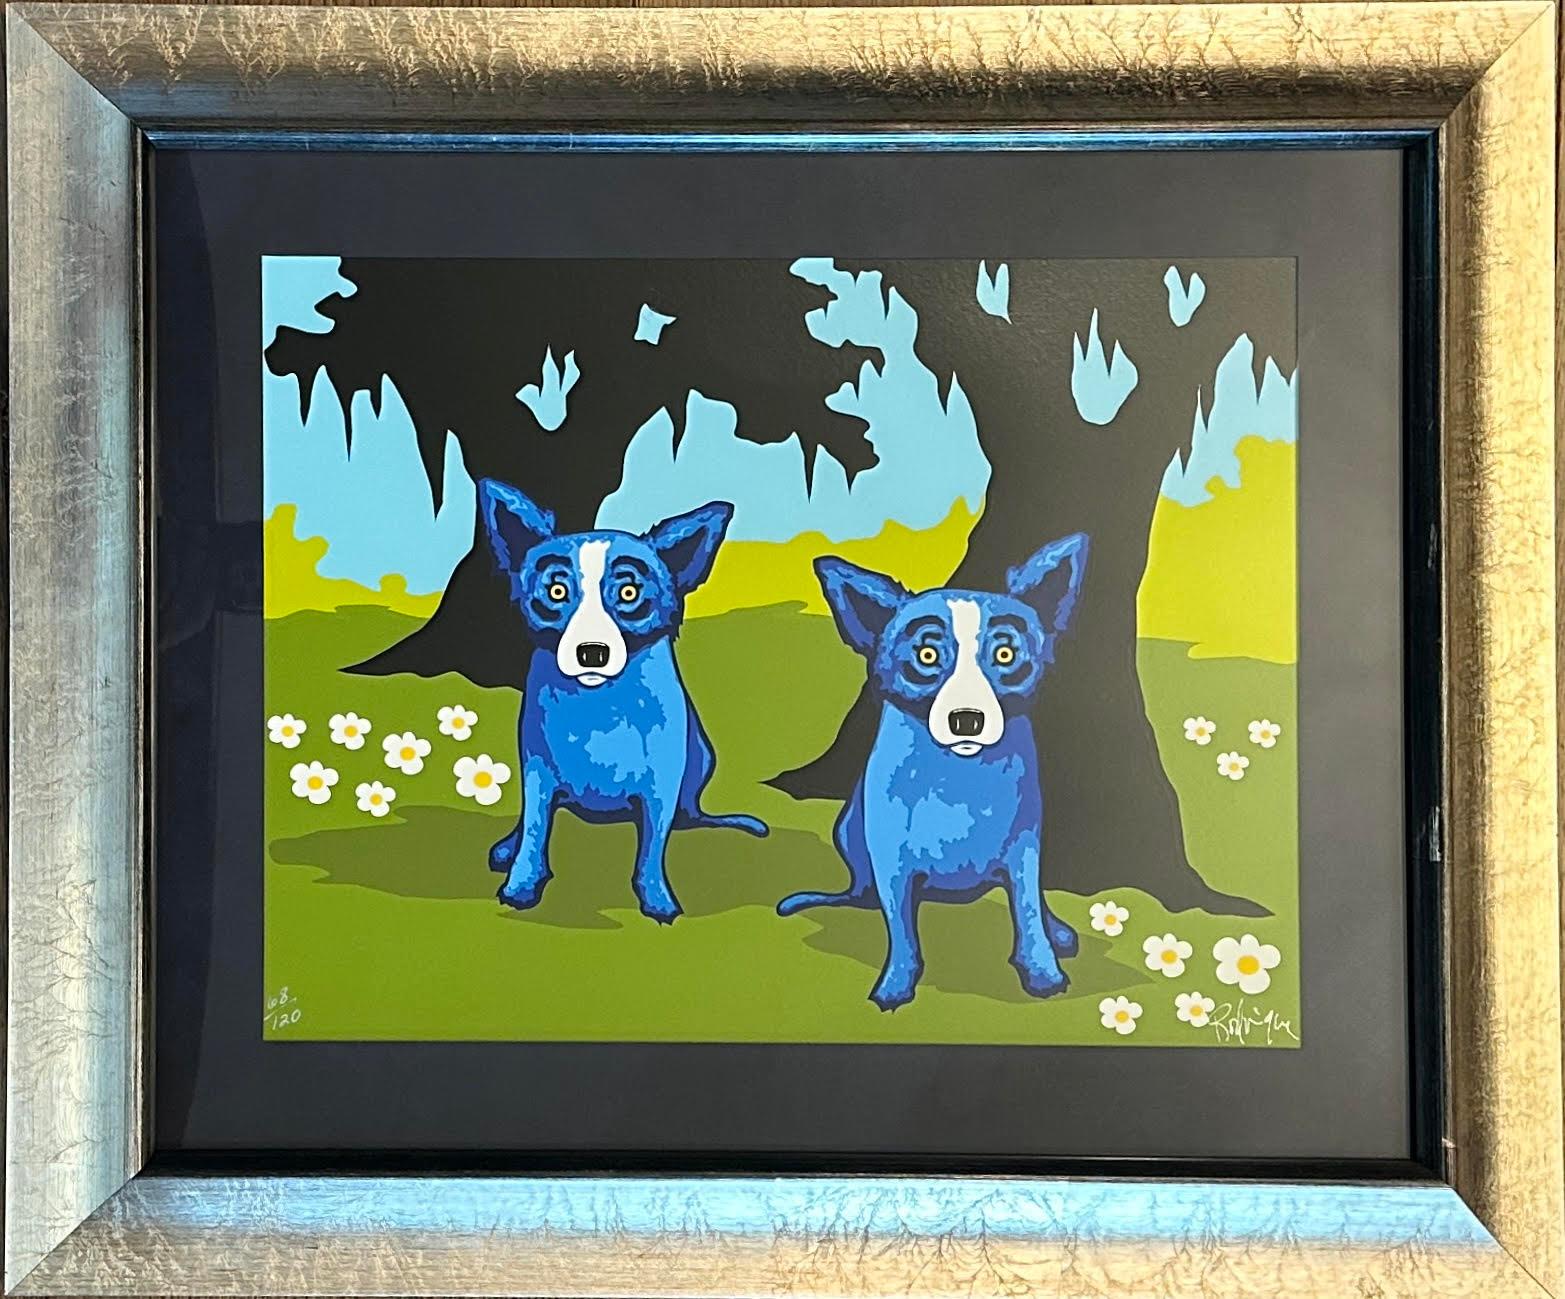 Daisies For You - Print by George Rodrigue